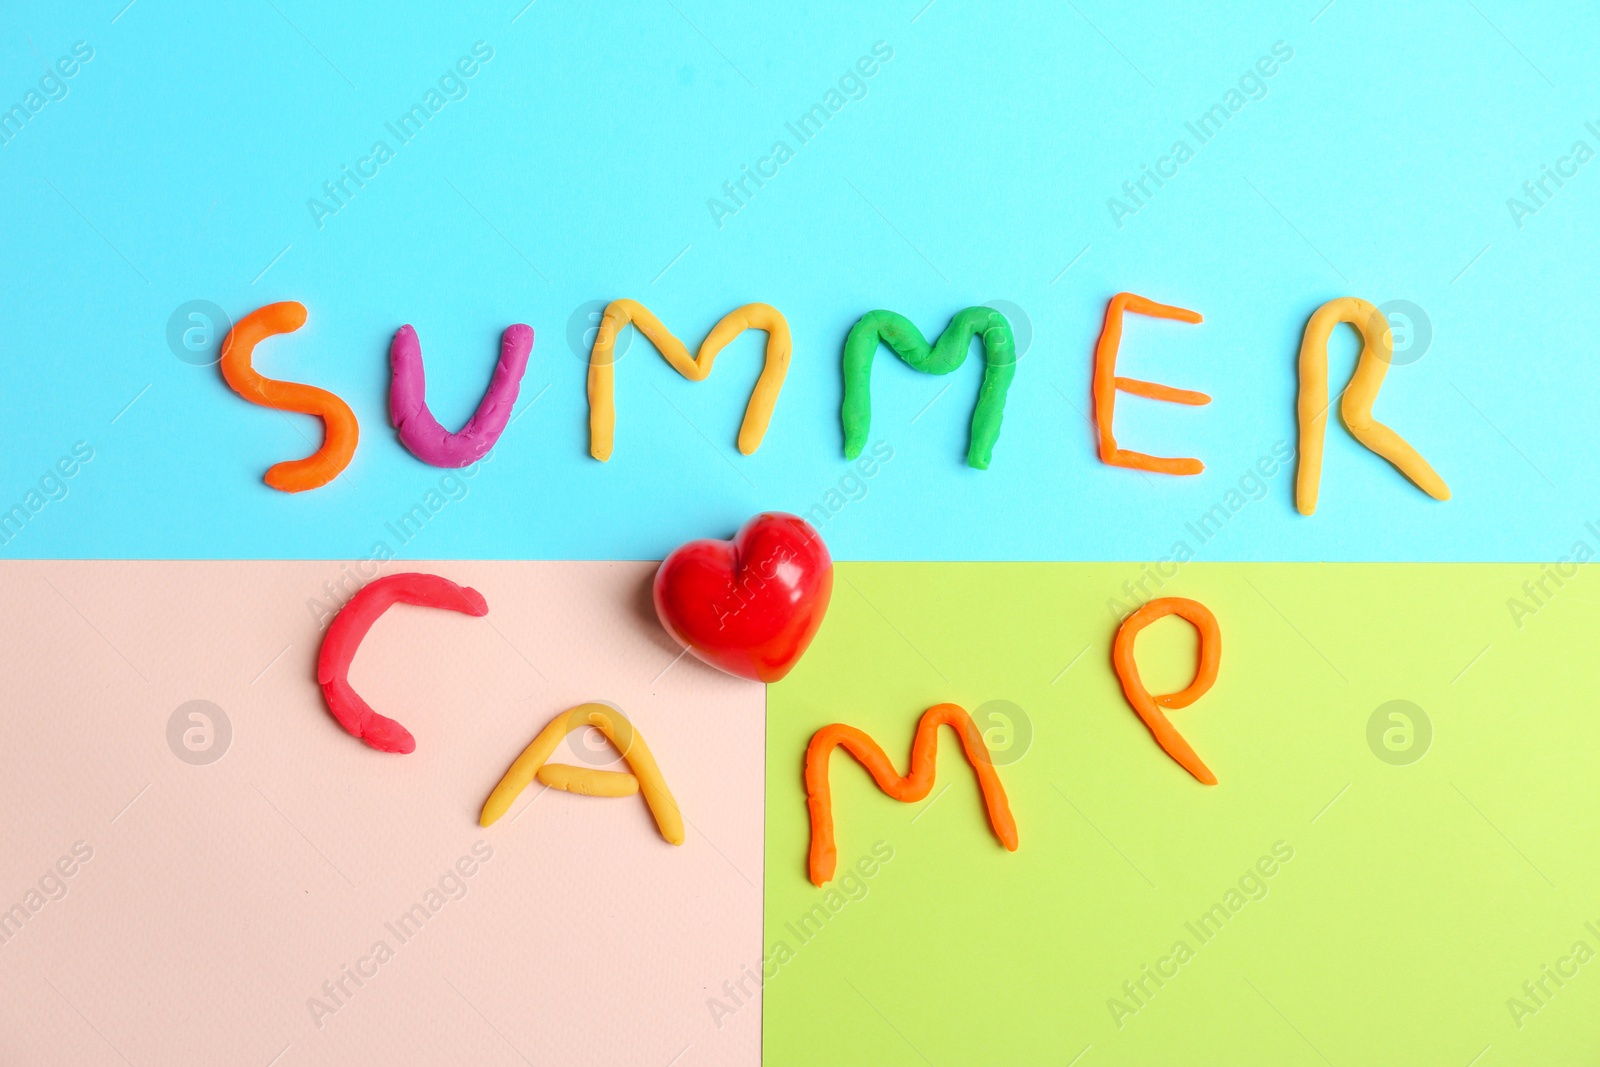 Photo of Words SUMMER CAMP made from modelling clay and small red heart on color background, top view